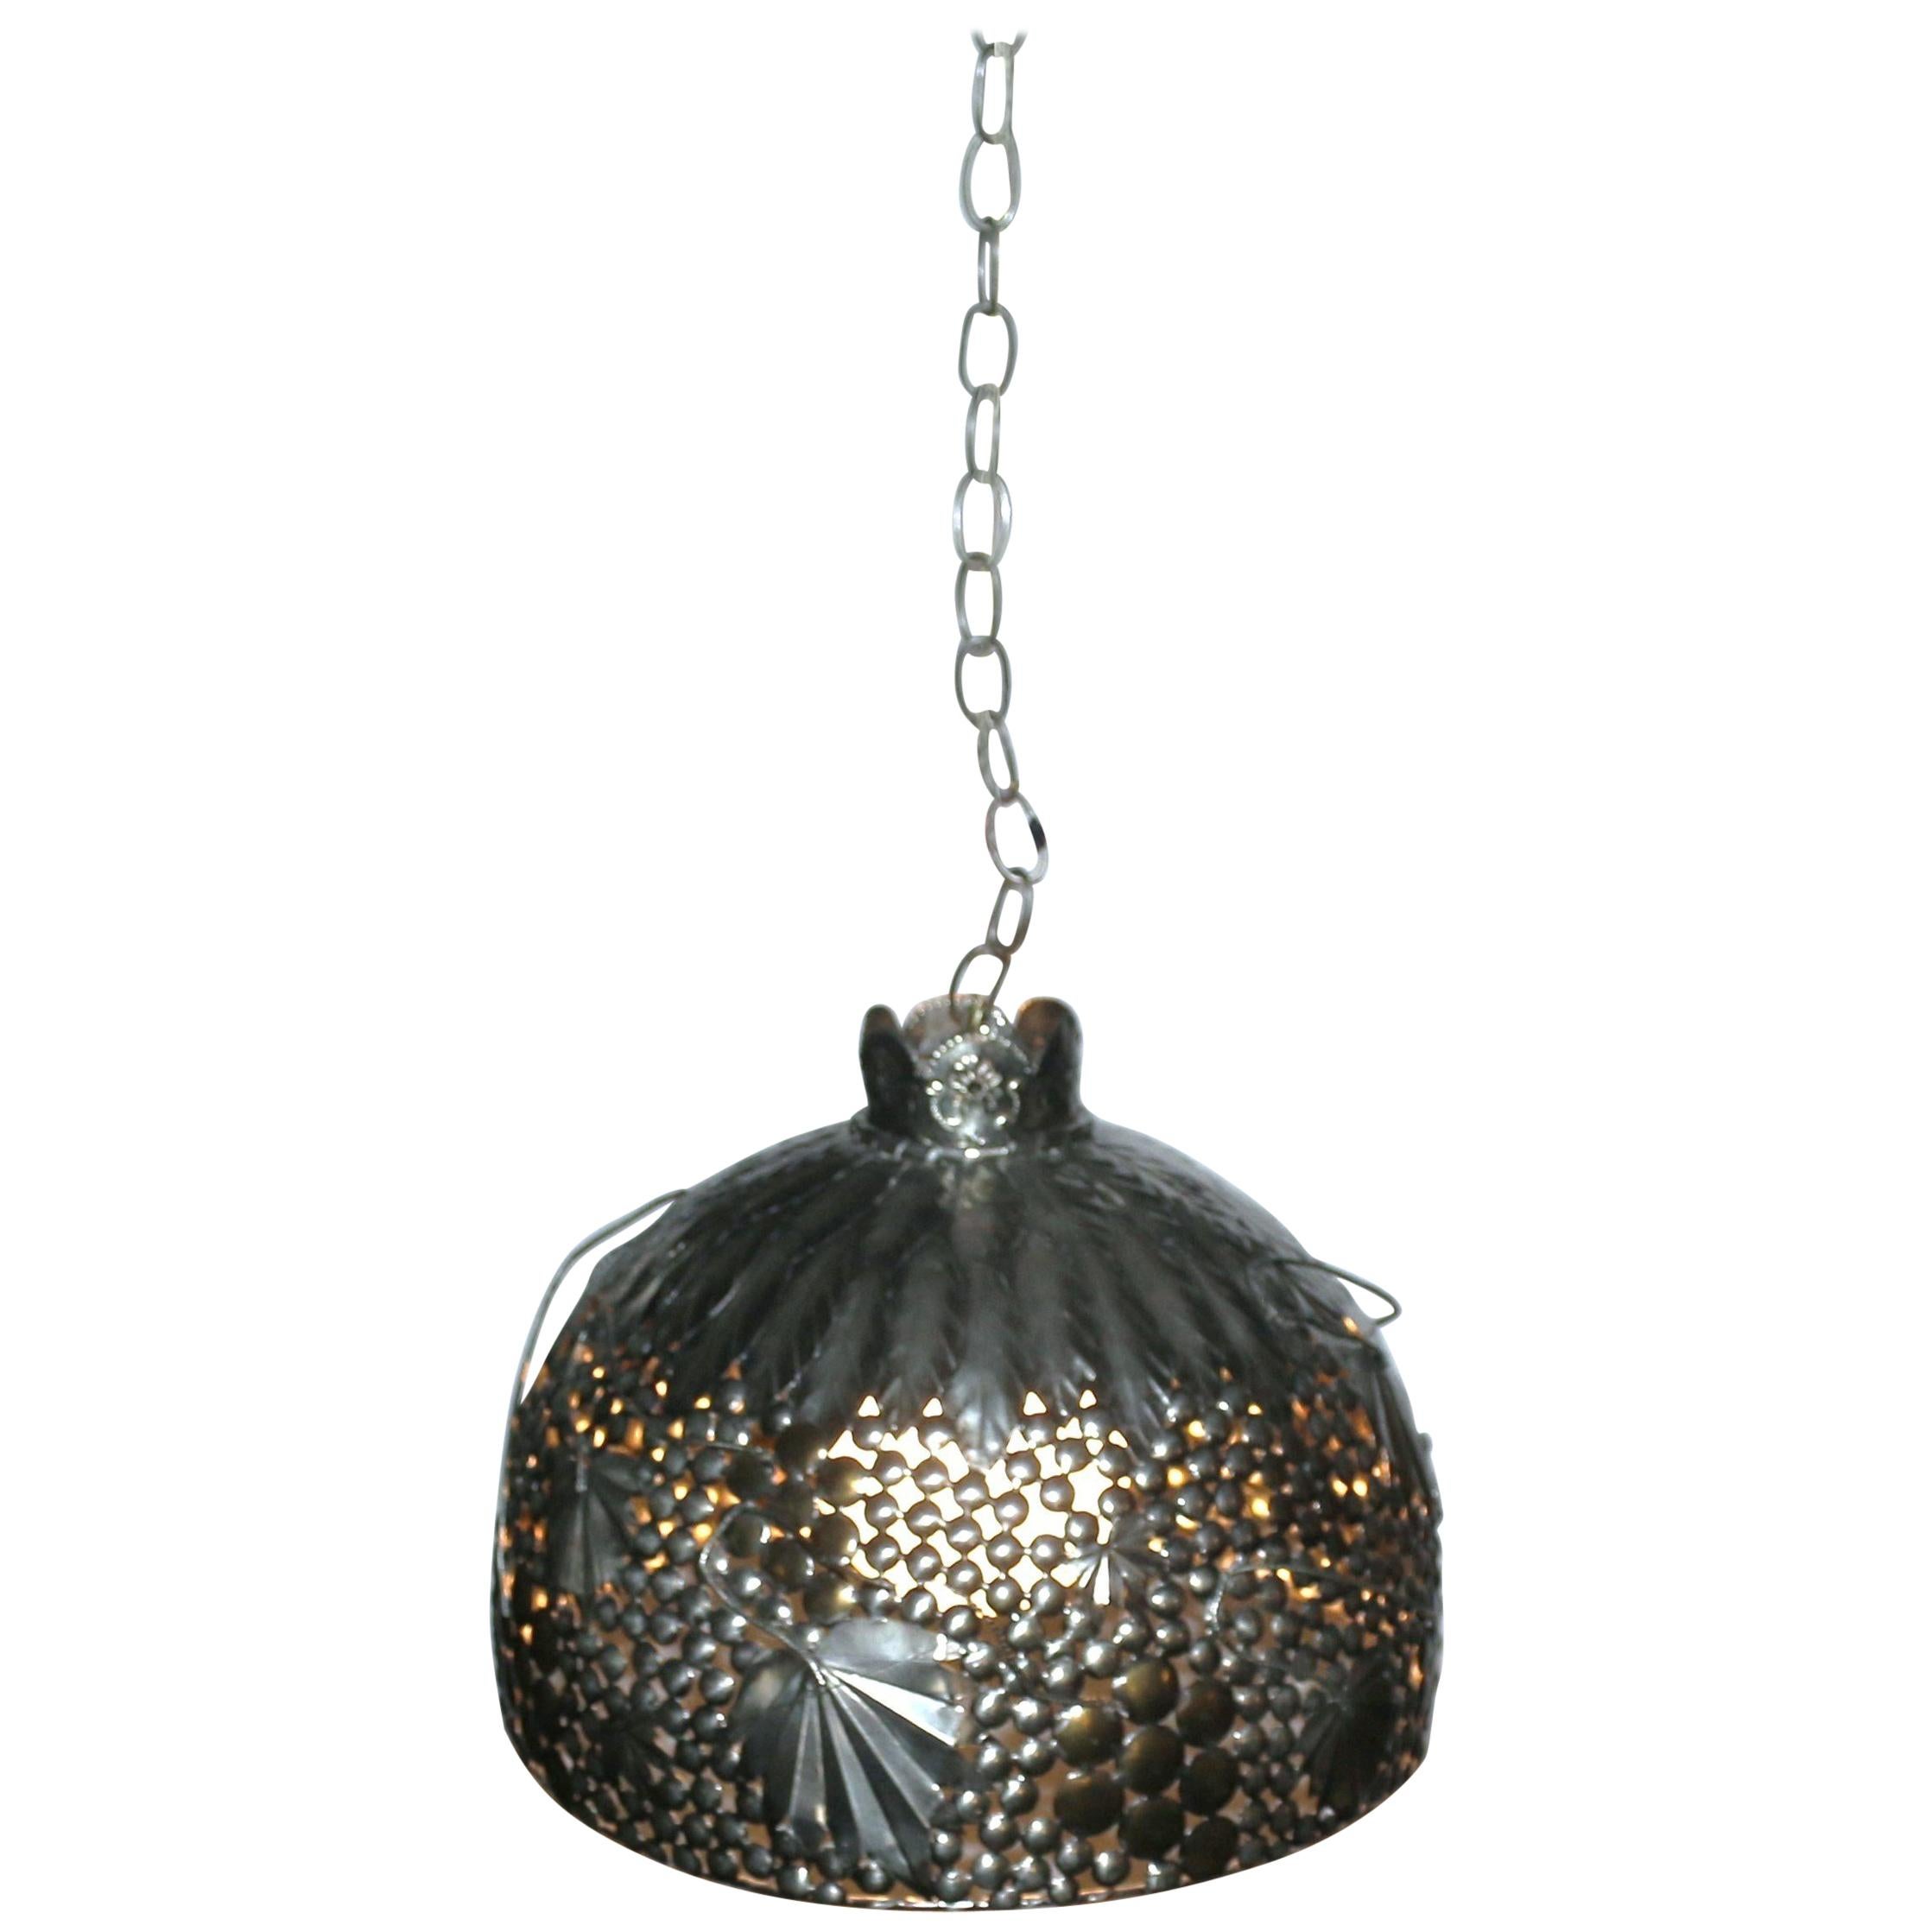 Sergio Bustamante Hanging Light For Sale